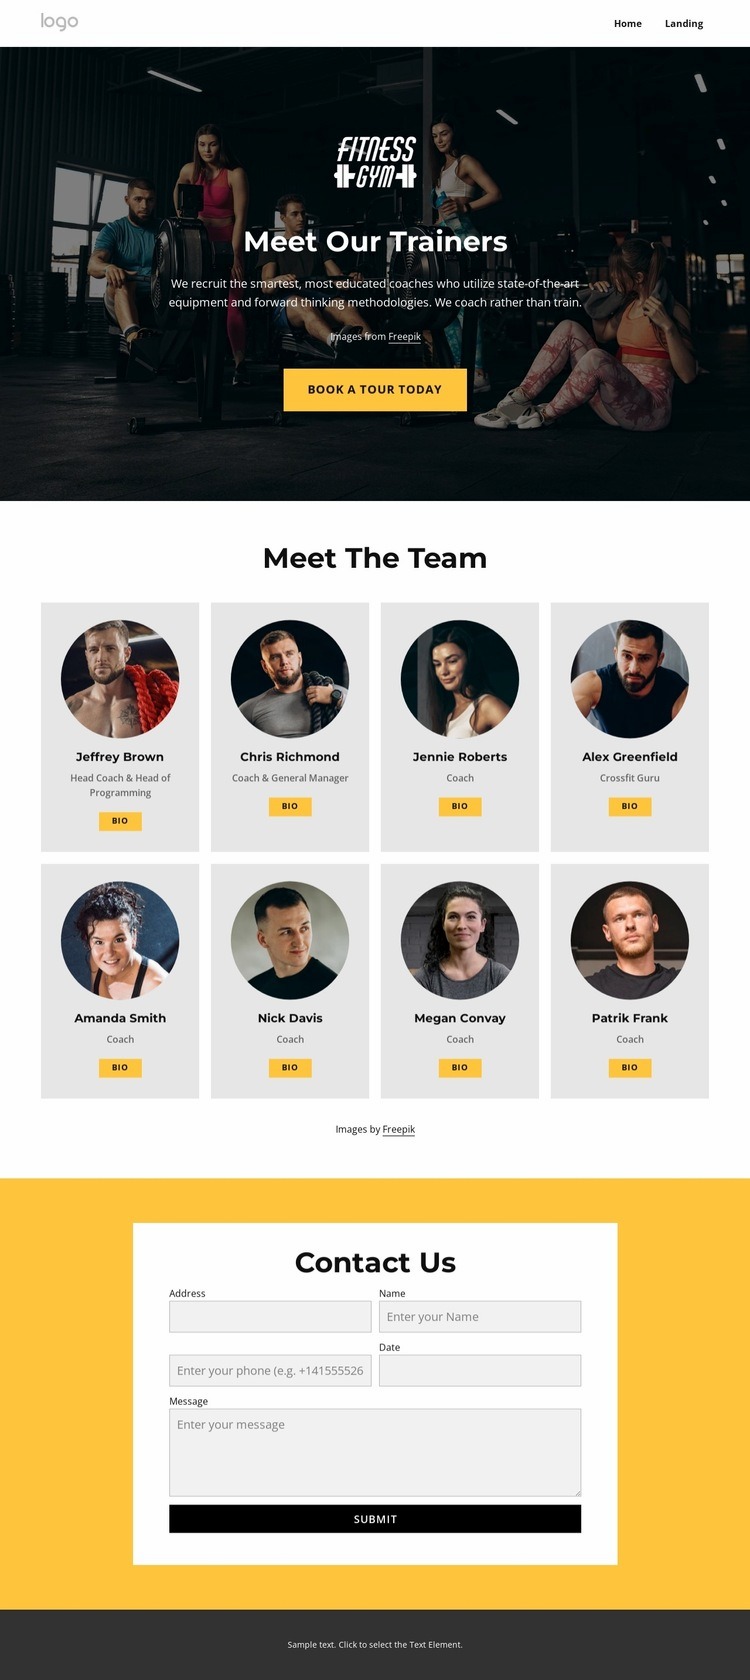 Meet our trainers Homepage Design